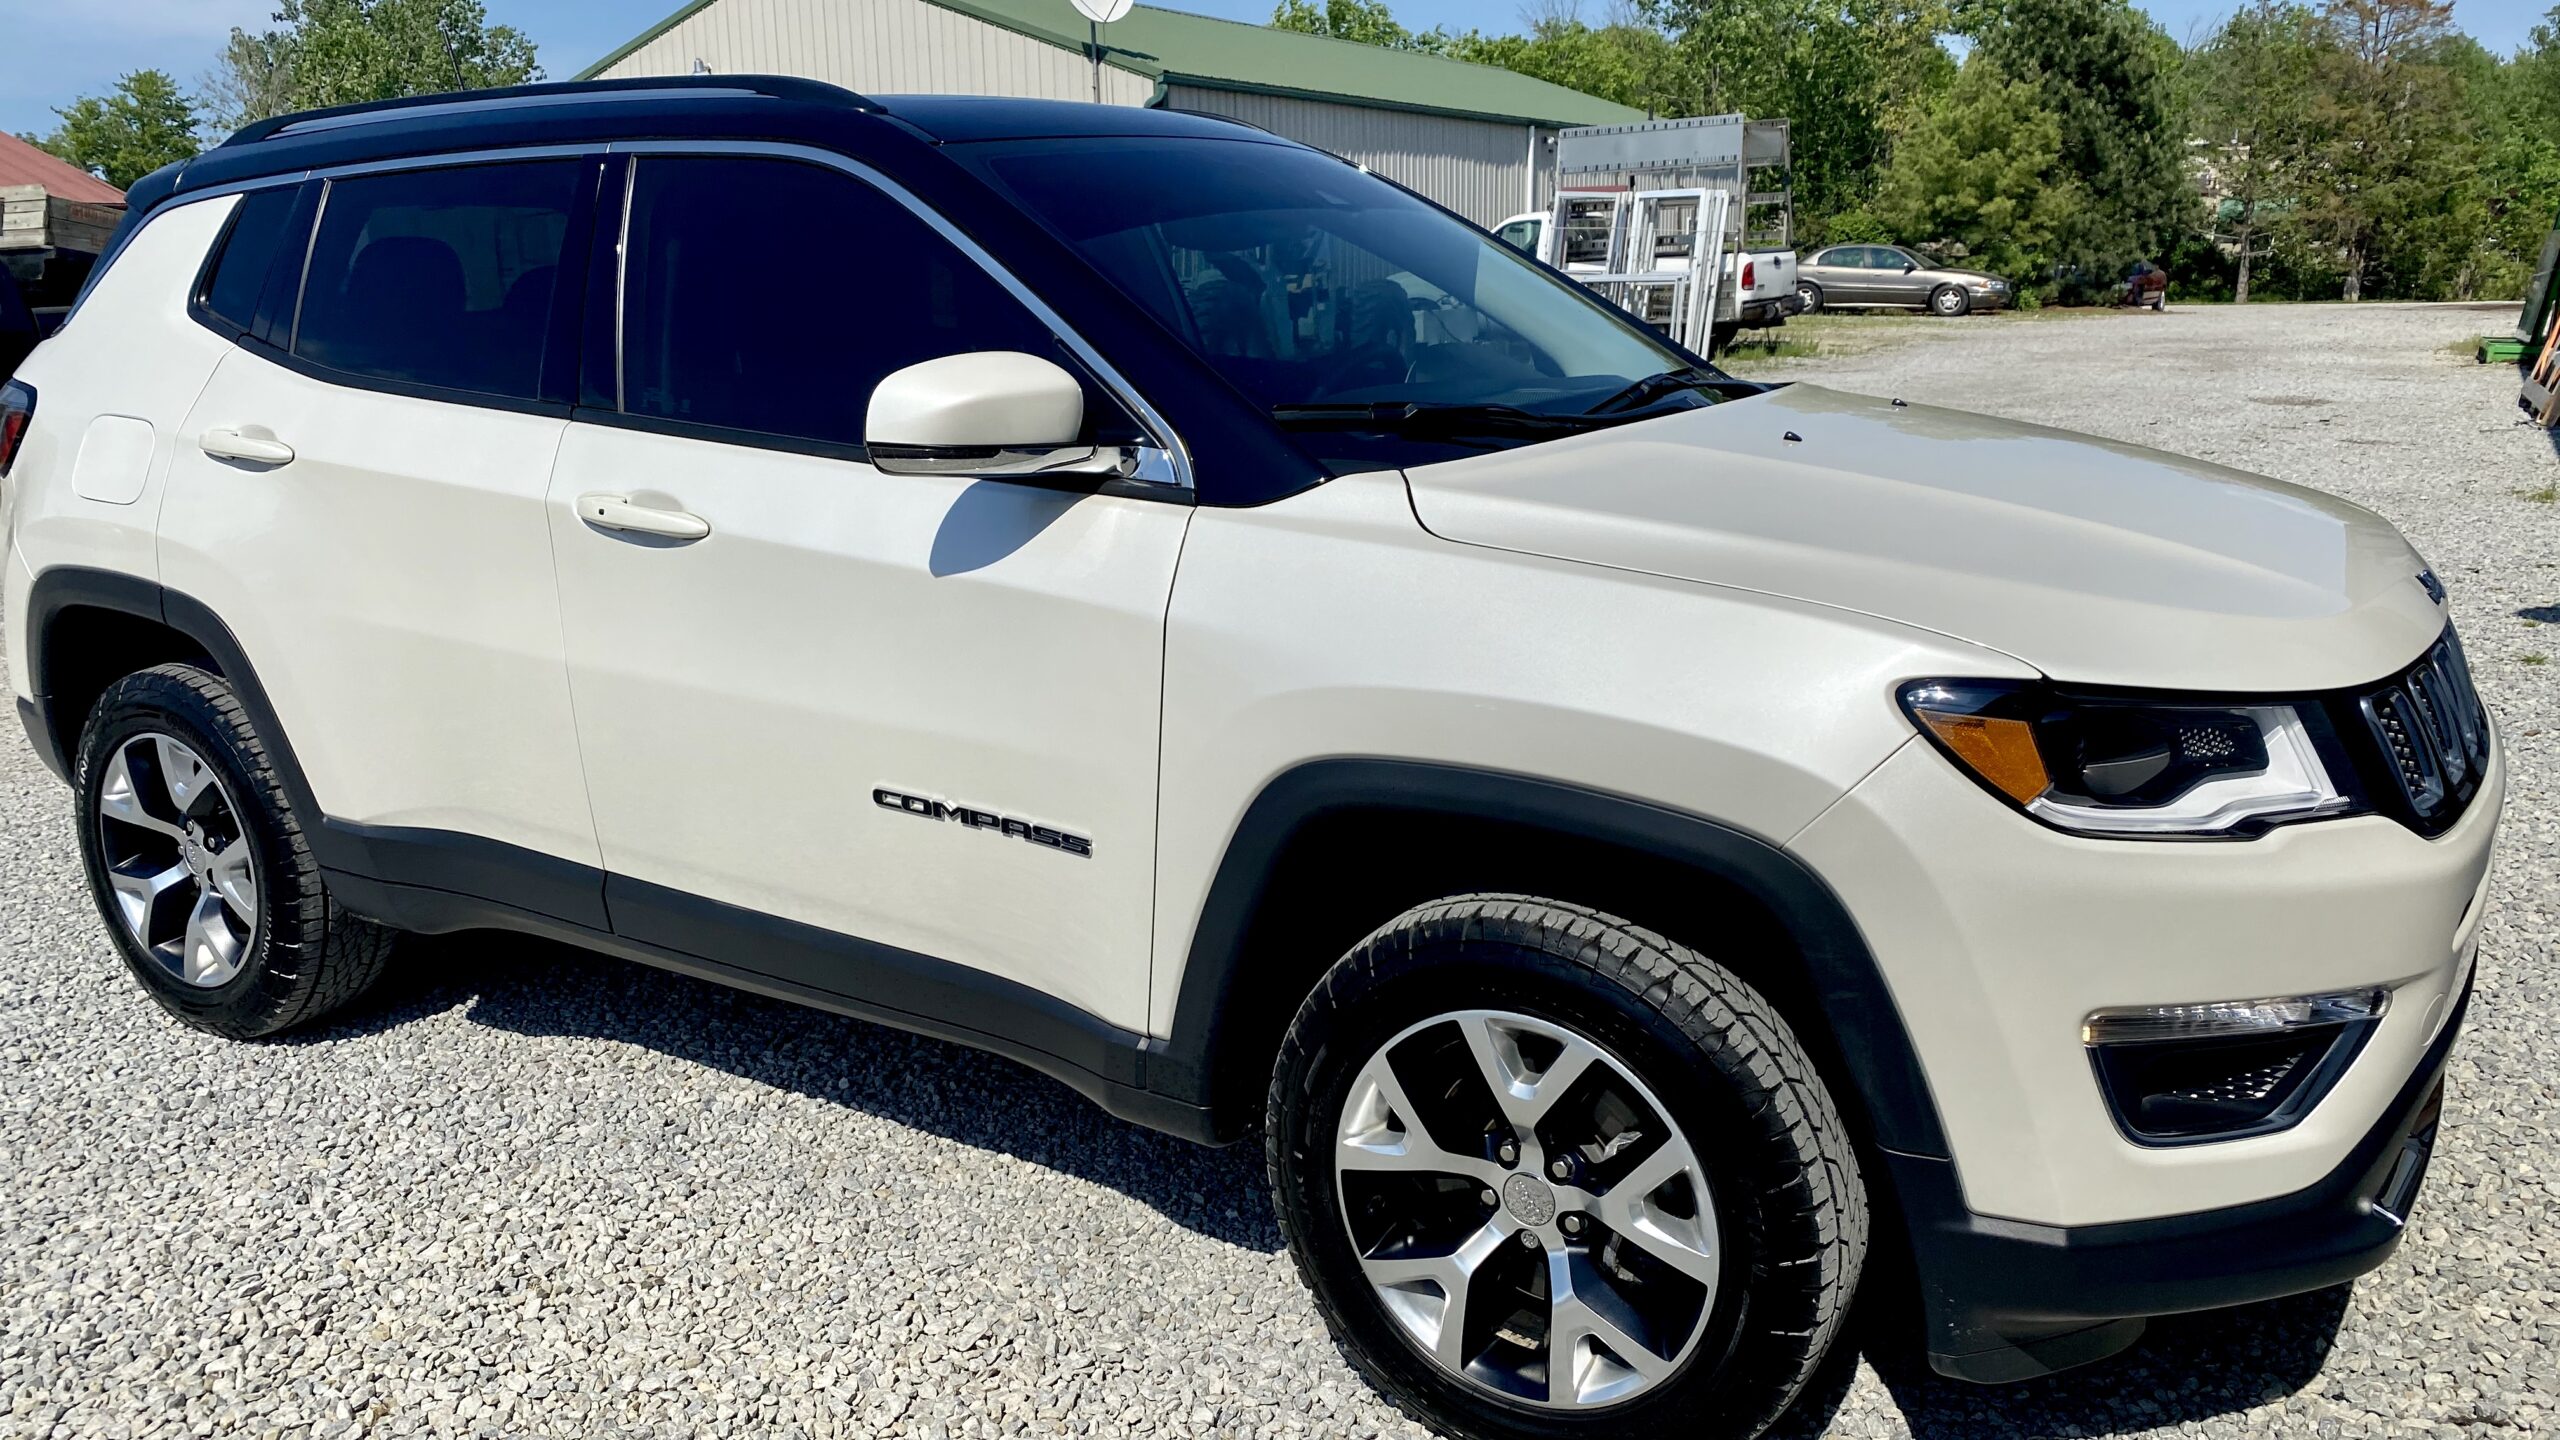 Thorough paint correction + ceramic coating and plastic trim treatment on  this 2019 Jeep Compass : r/AutoDetailing